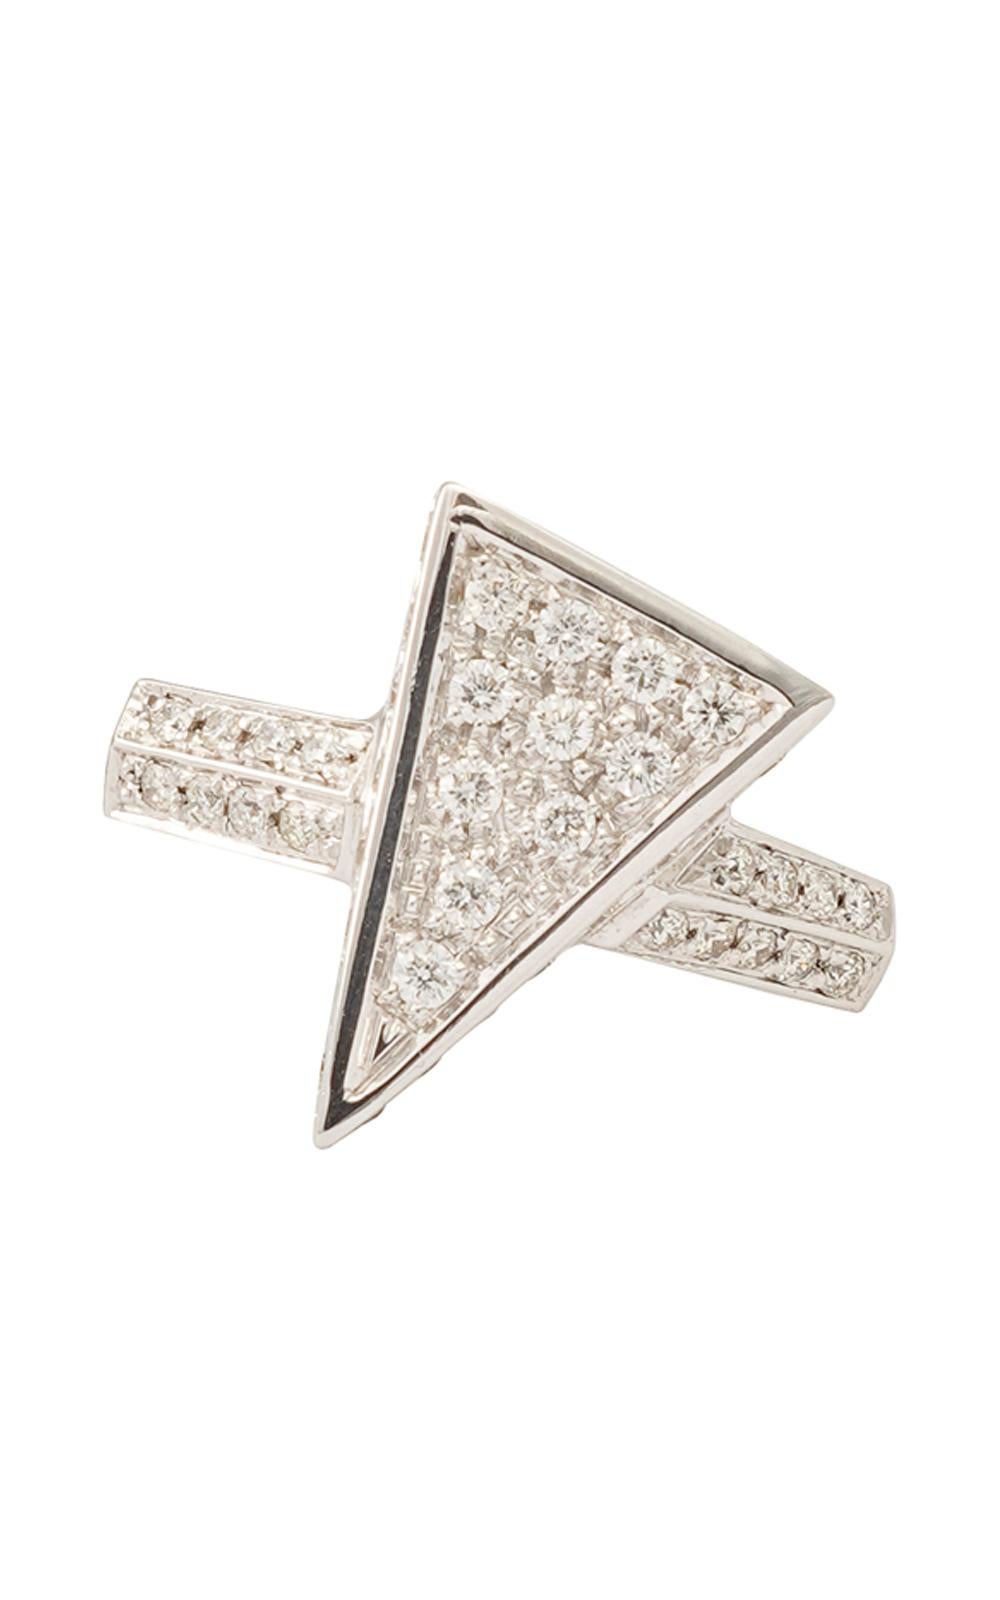 Pavé diamond ring with a central triangle motif
It is a typical cocktail ring
Handcrafted in 18K white gold and brilliant cut diamonds
The modern style ring with an innovative design has a 0.65 carat diamond pave
The ring is made entirely by hand in